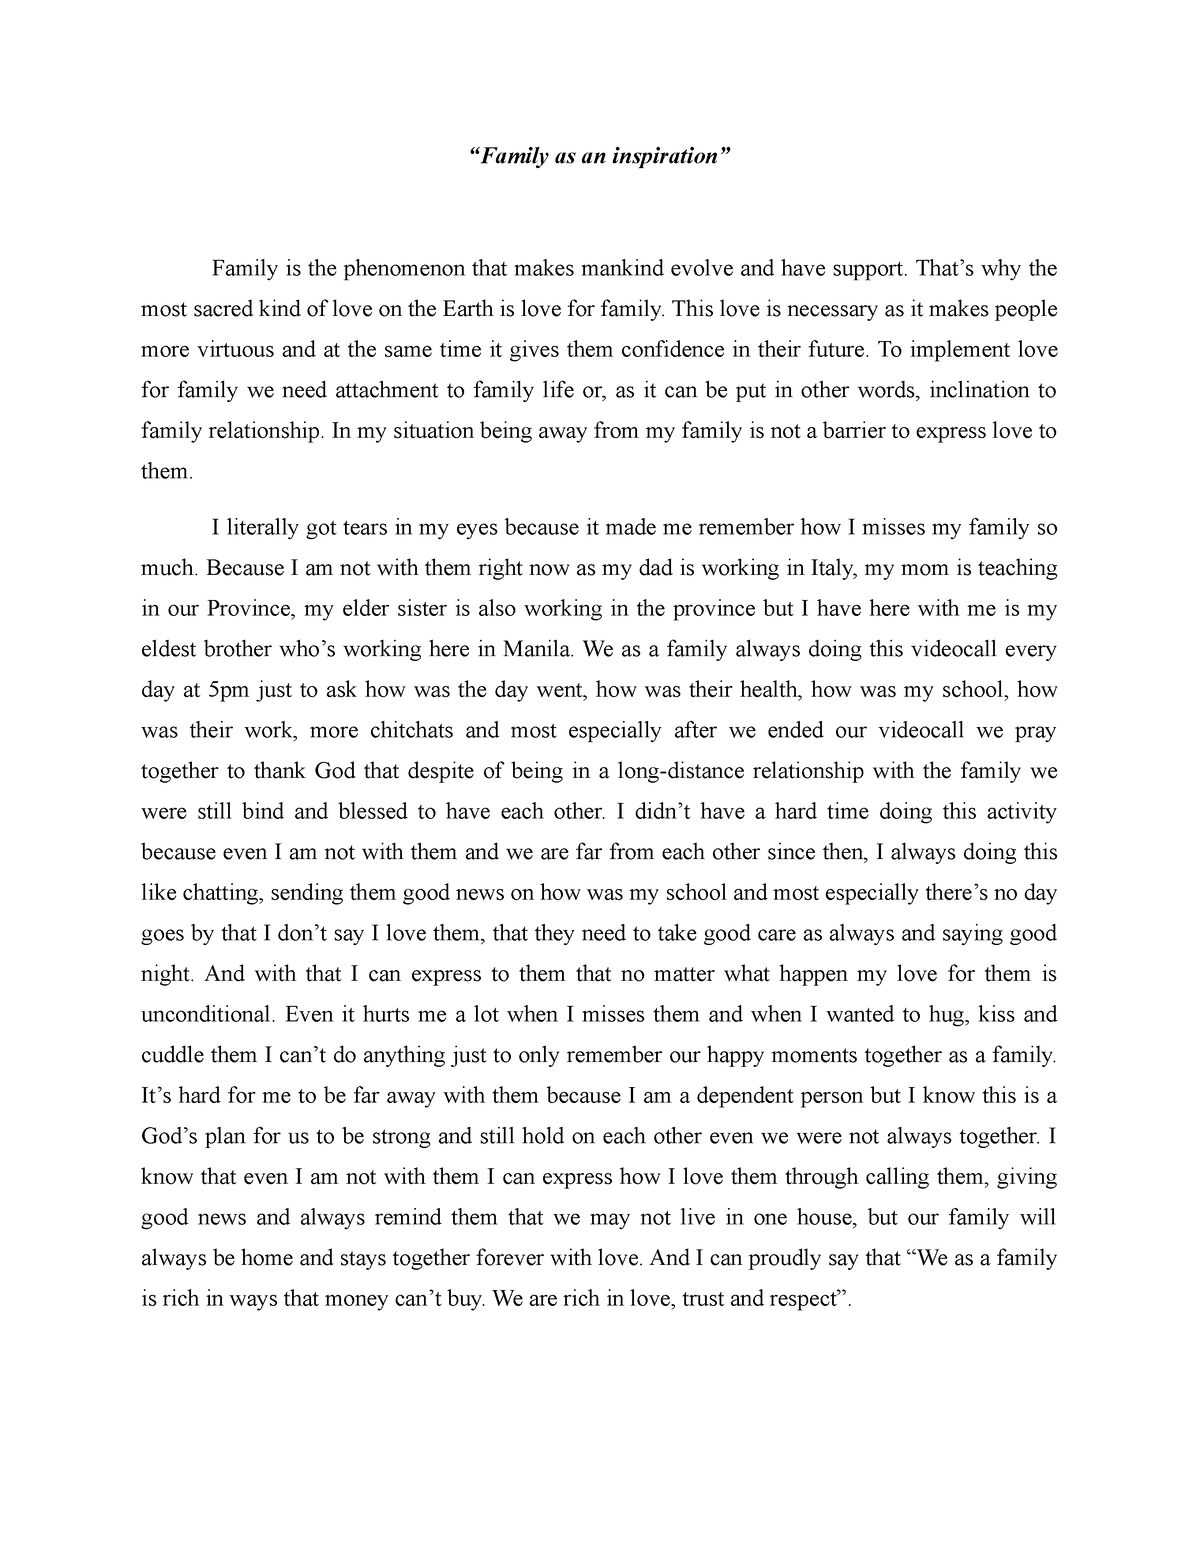 definition essay about family